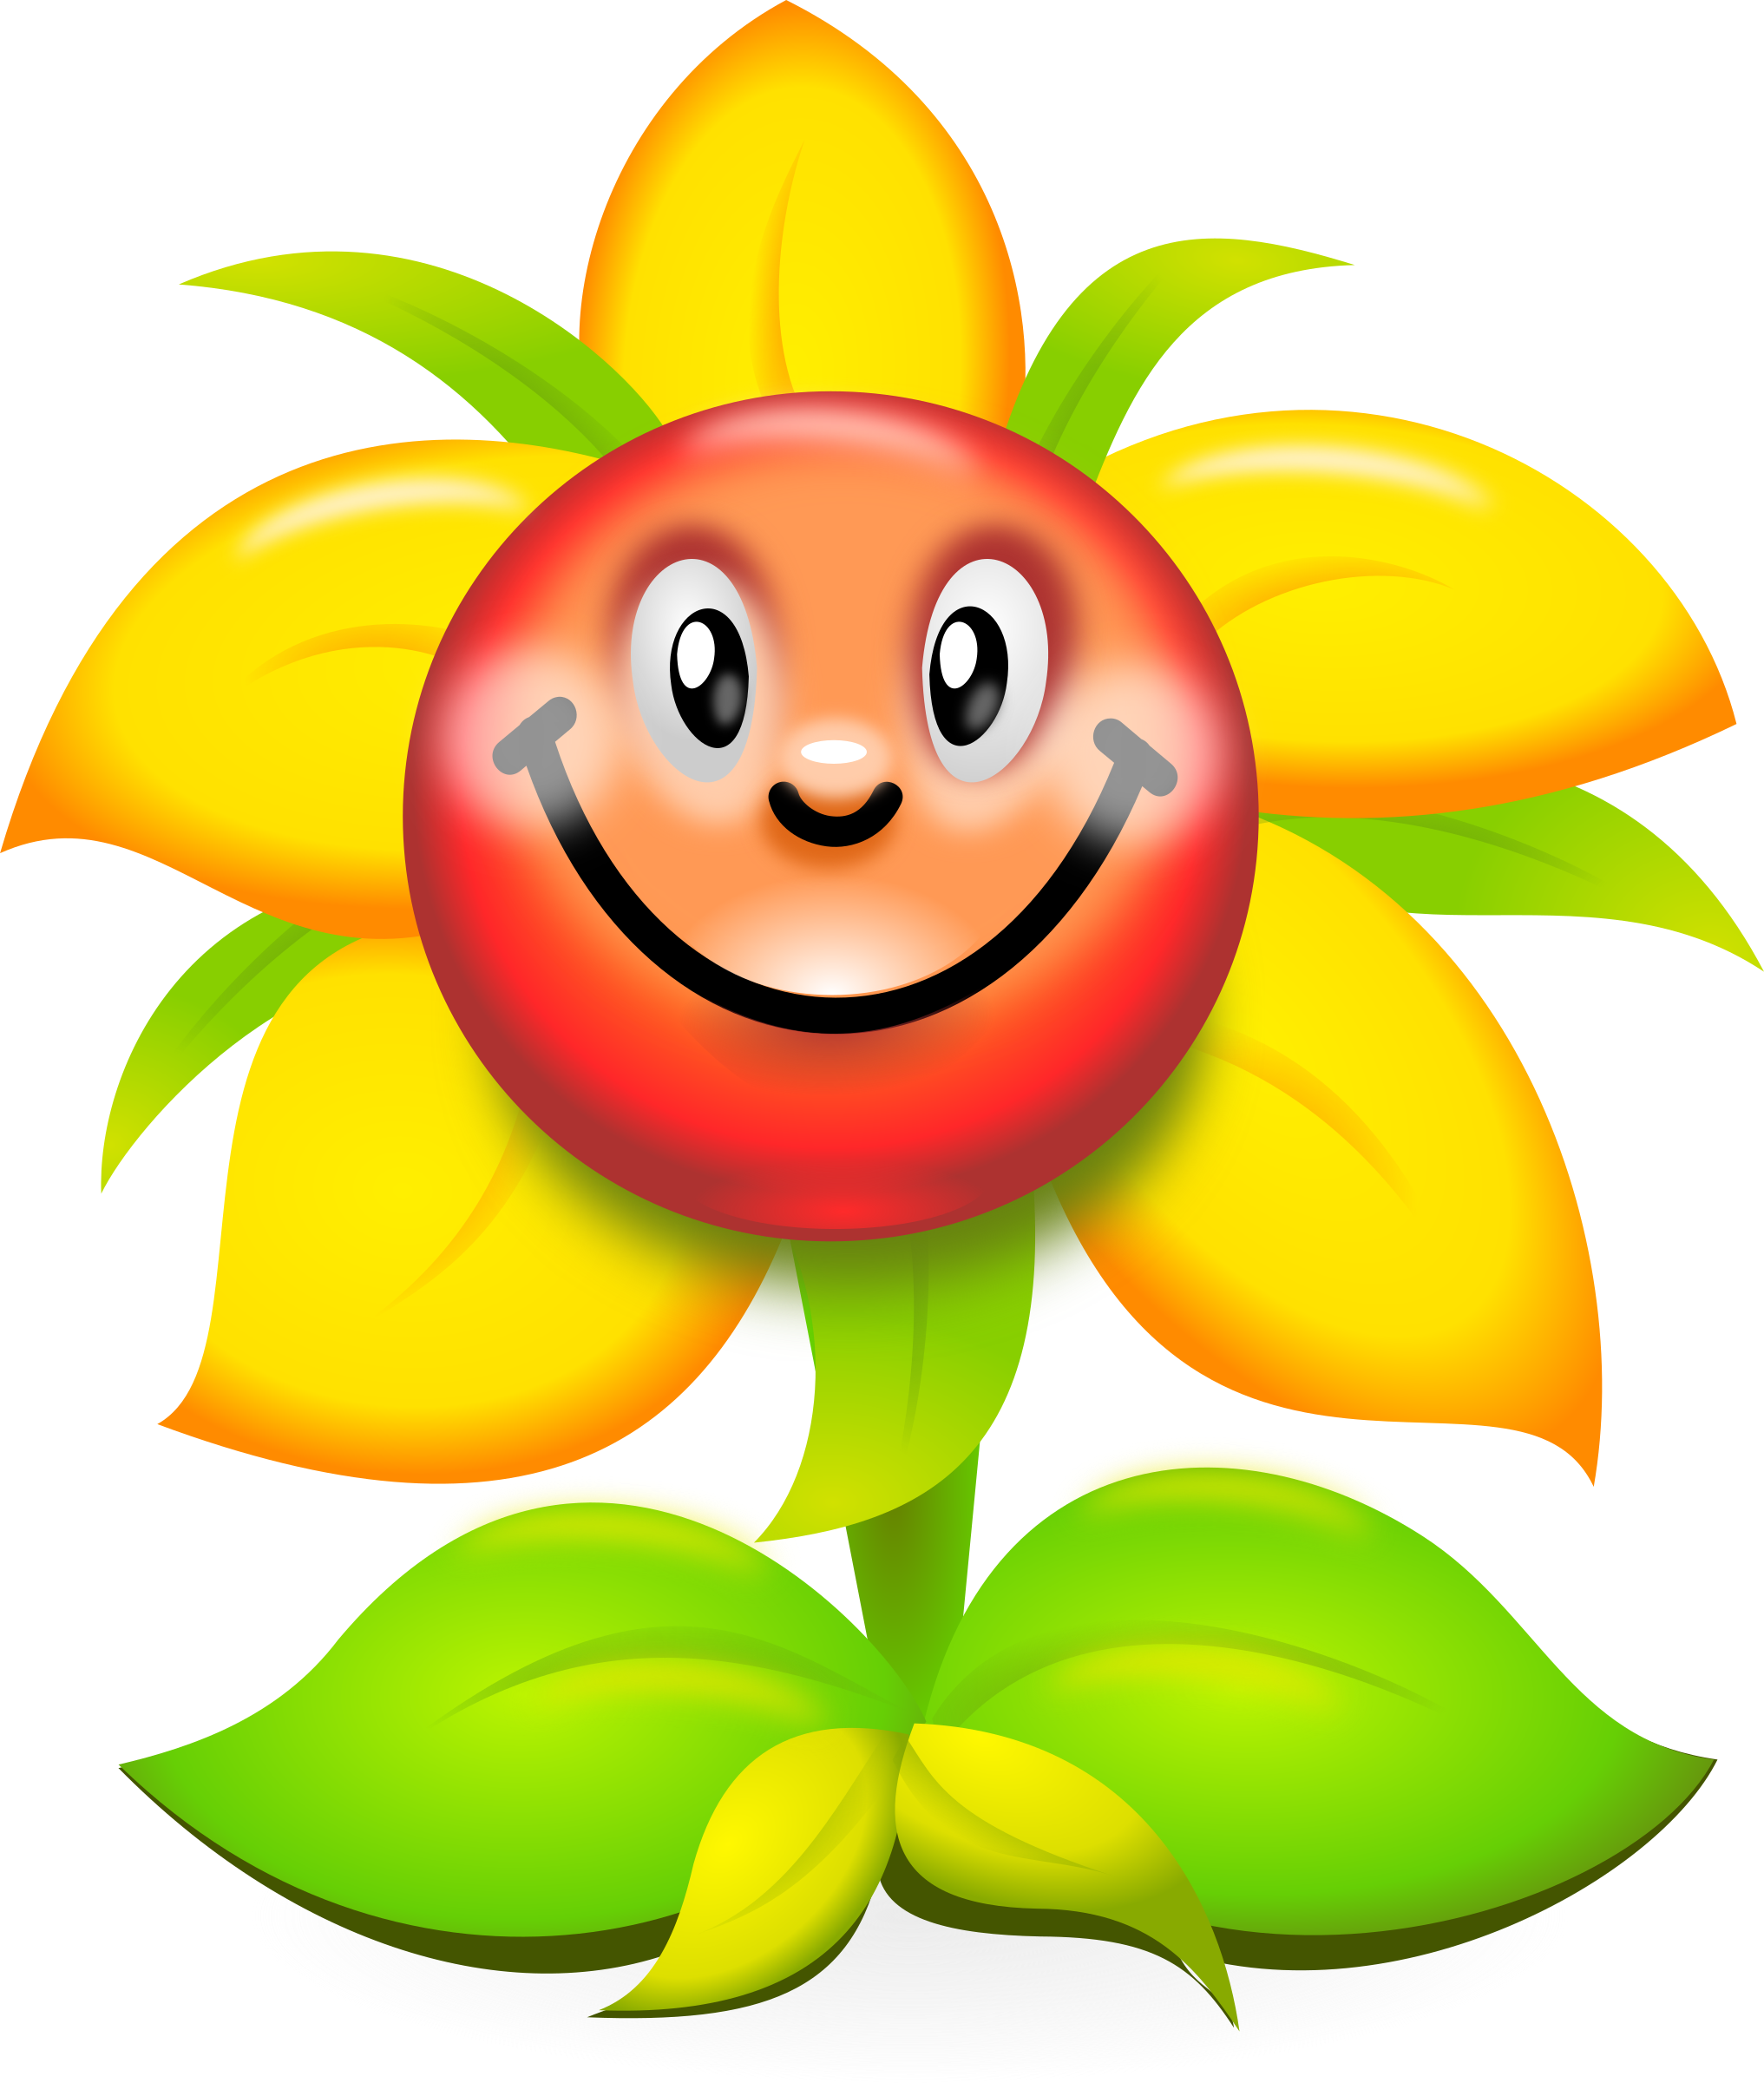 Yellow Flower Clipart Smiley Flower - Yellow Flower Clipart Smiley Flower (2033x2400)